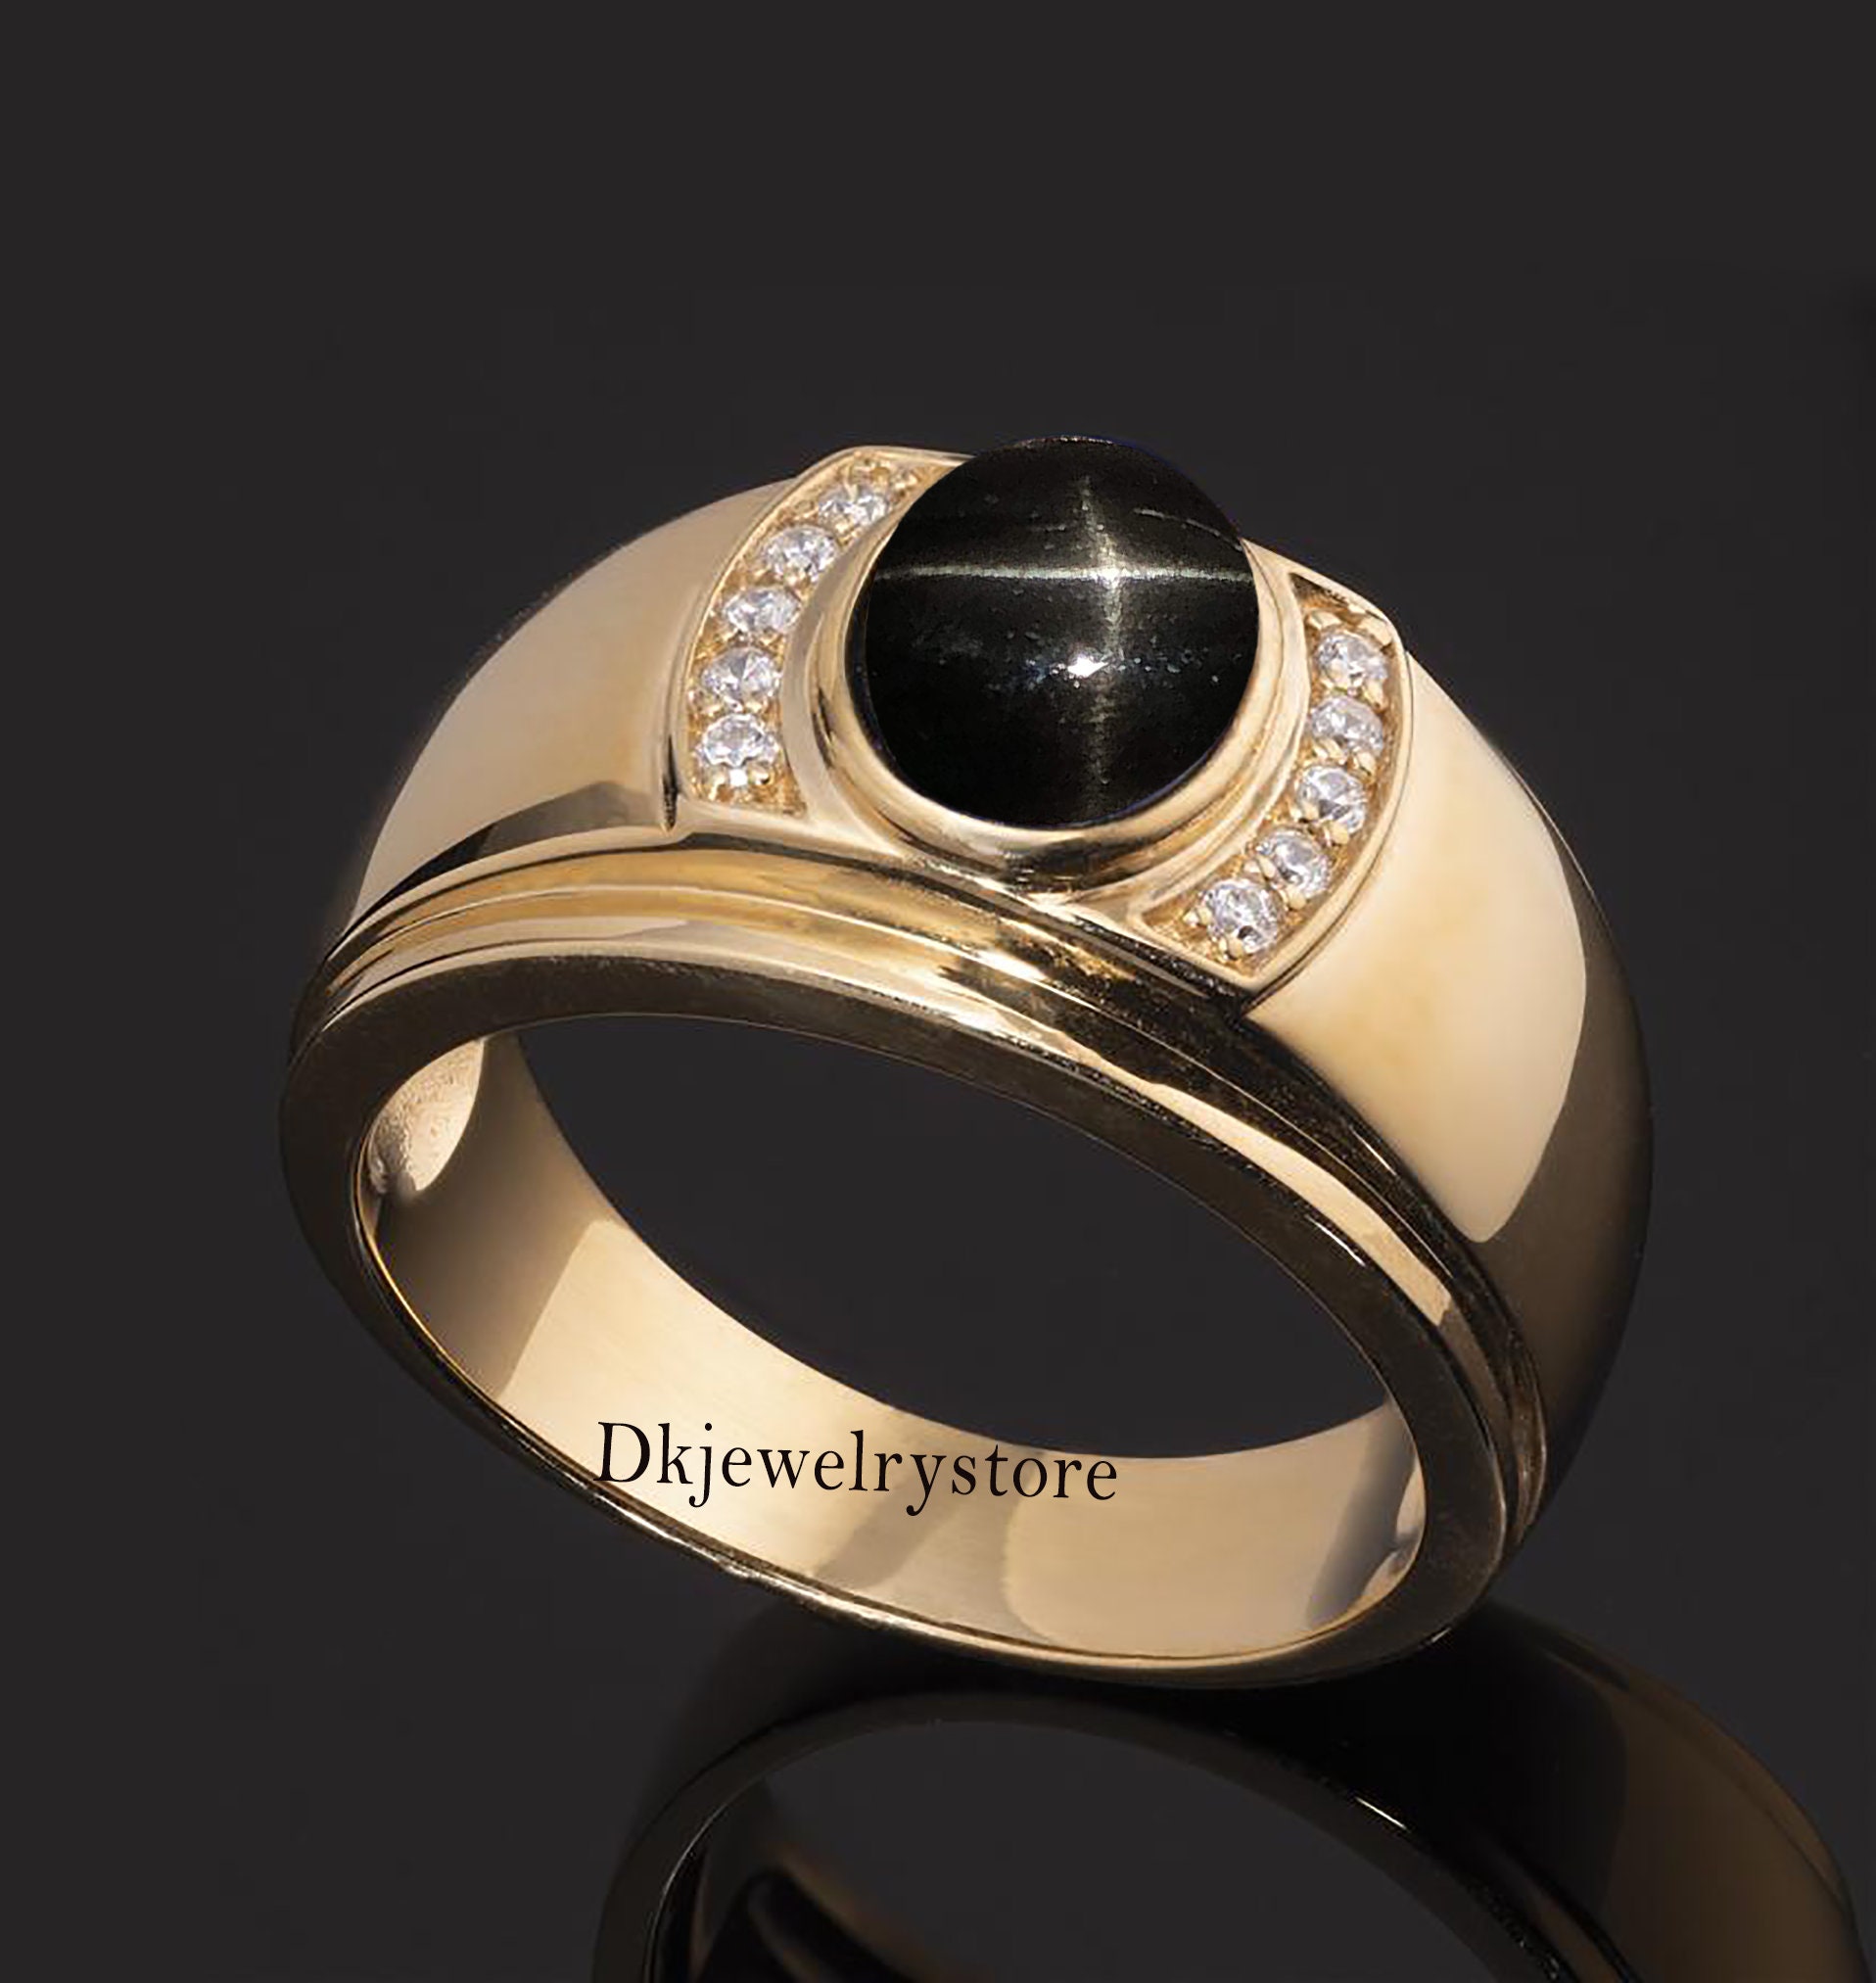 GRAPHITE GOLD RING for Men with Carbon Graphite and Gold Steel